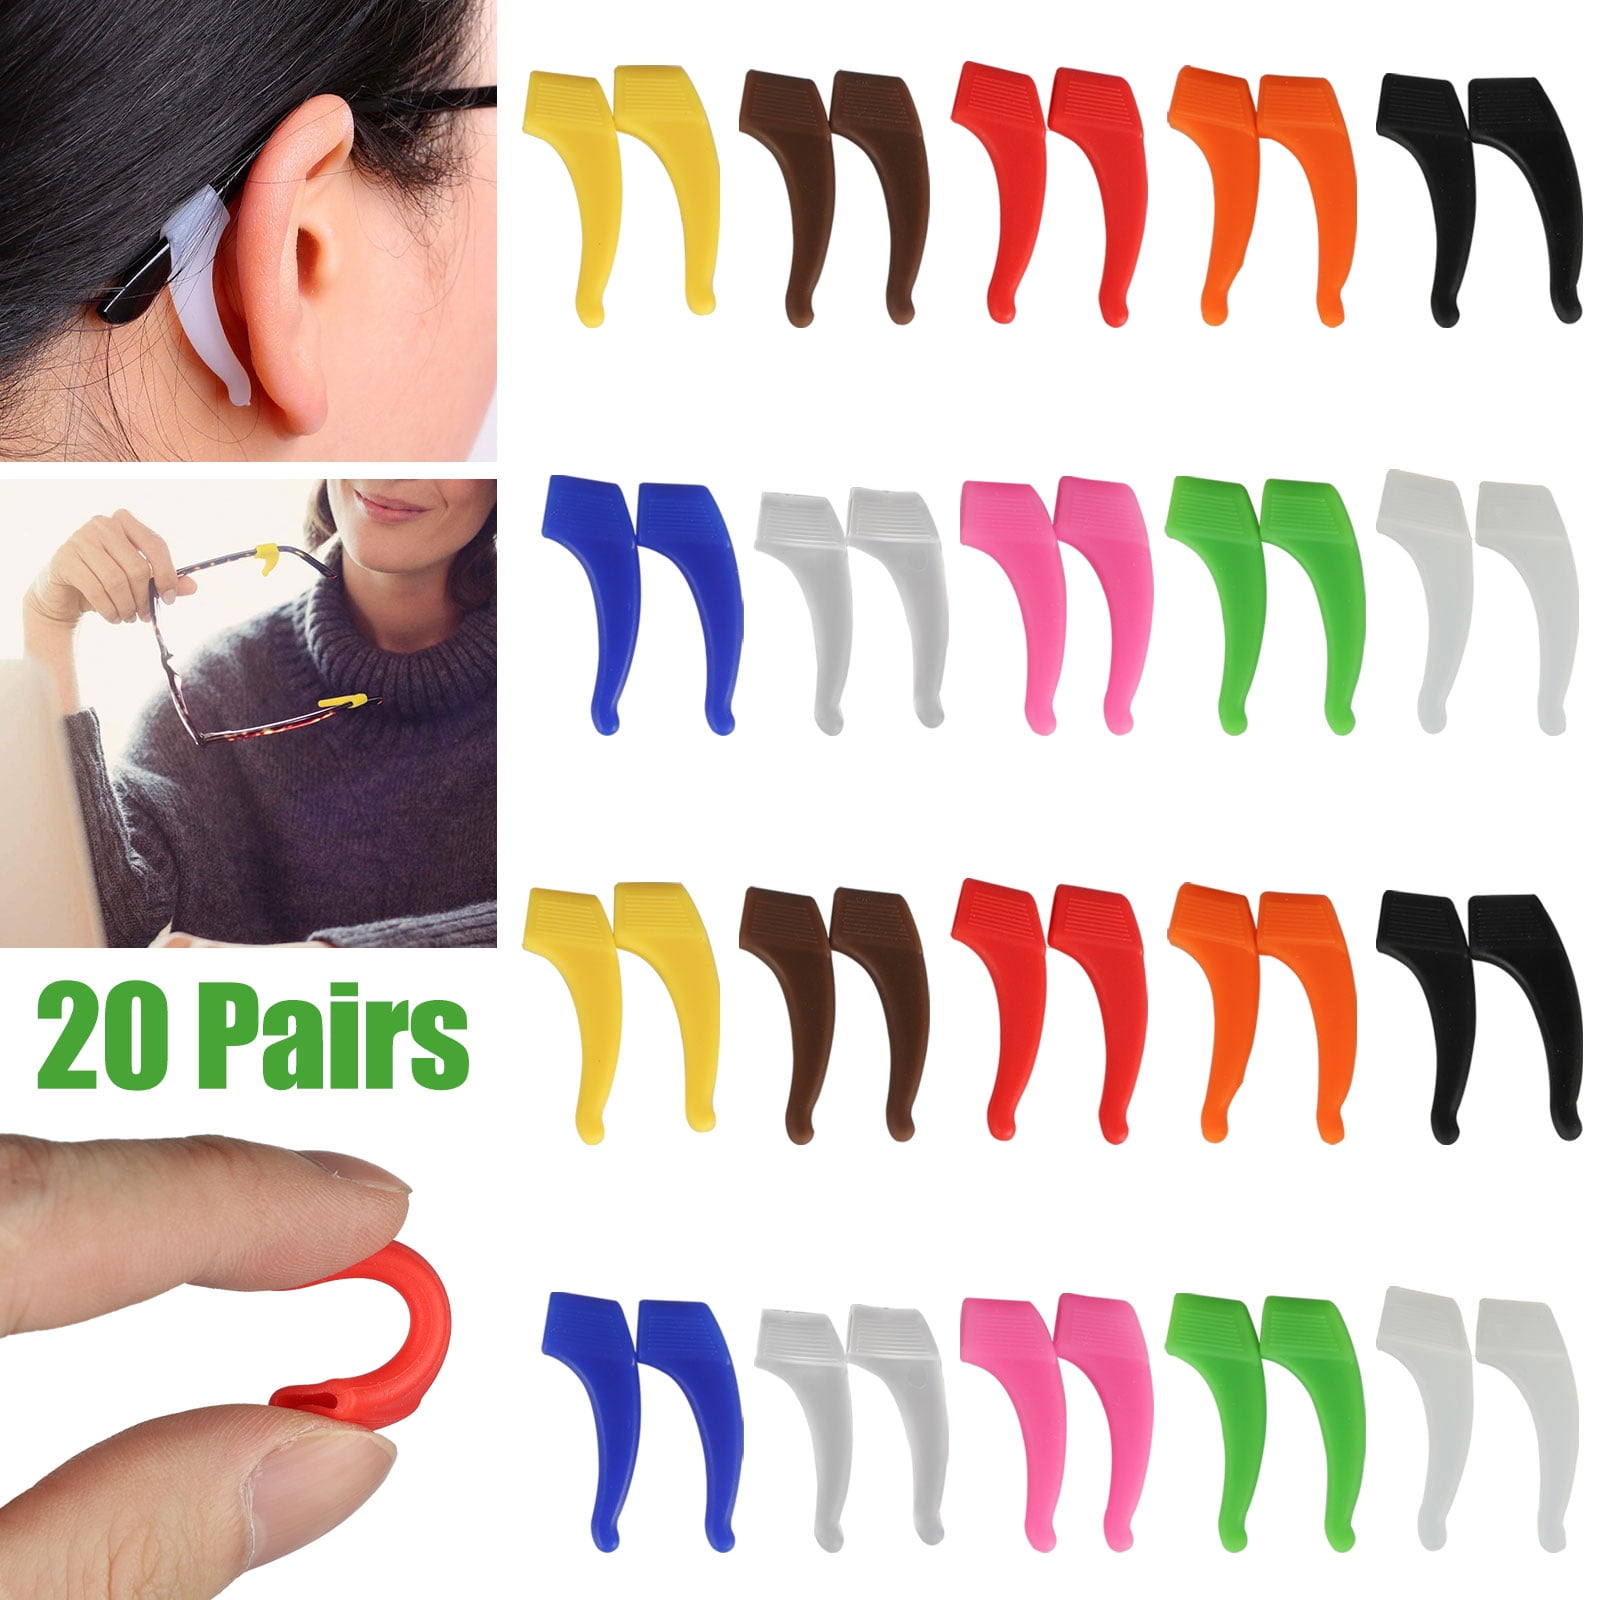 10 Pairs Kids and Adults Sport Eyeglass Strap Holder Eyeglass Temple Tip Silicone Anti Slip Holder Glasses Piece Eyewear Retainer for Ear Hook